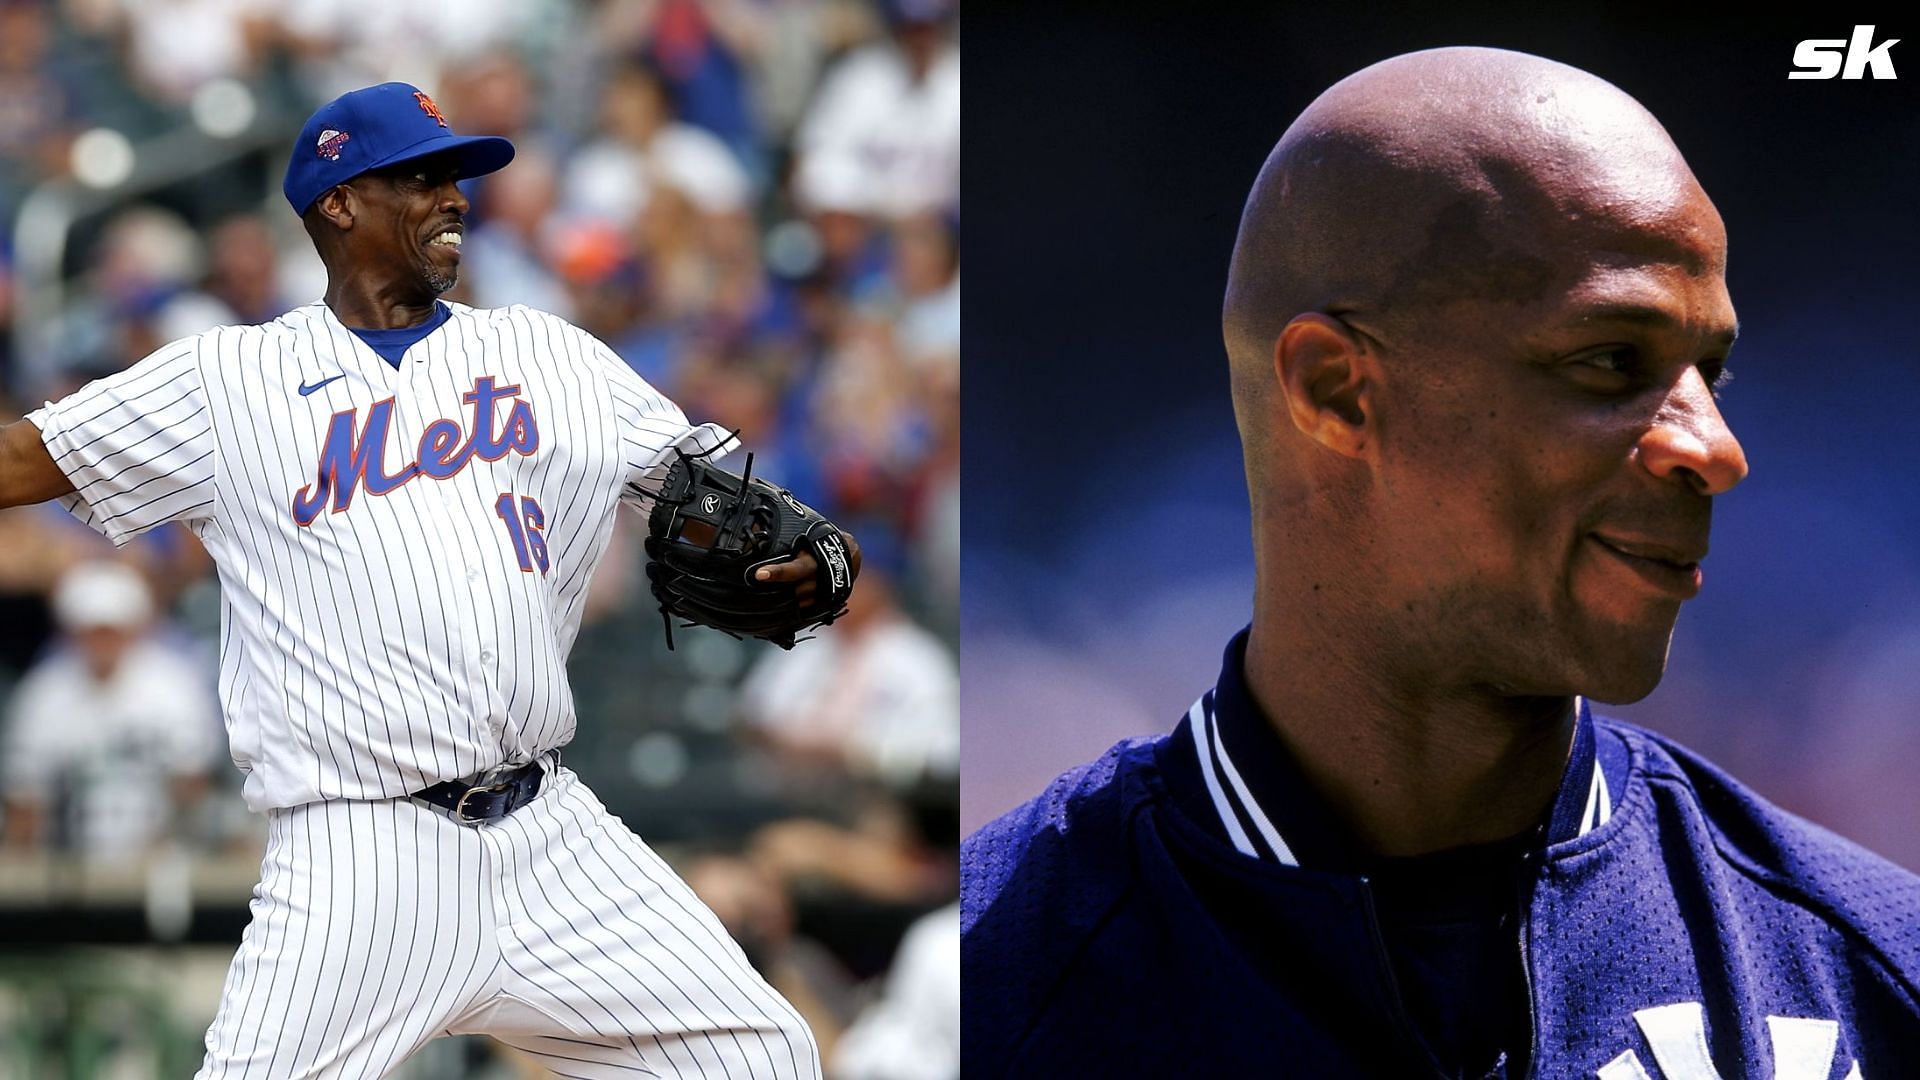 Dwight Gooden's ex-wife says troubled player 'tired' of demons